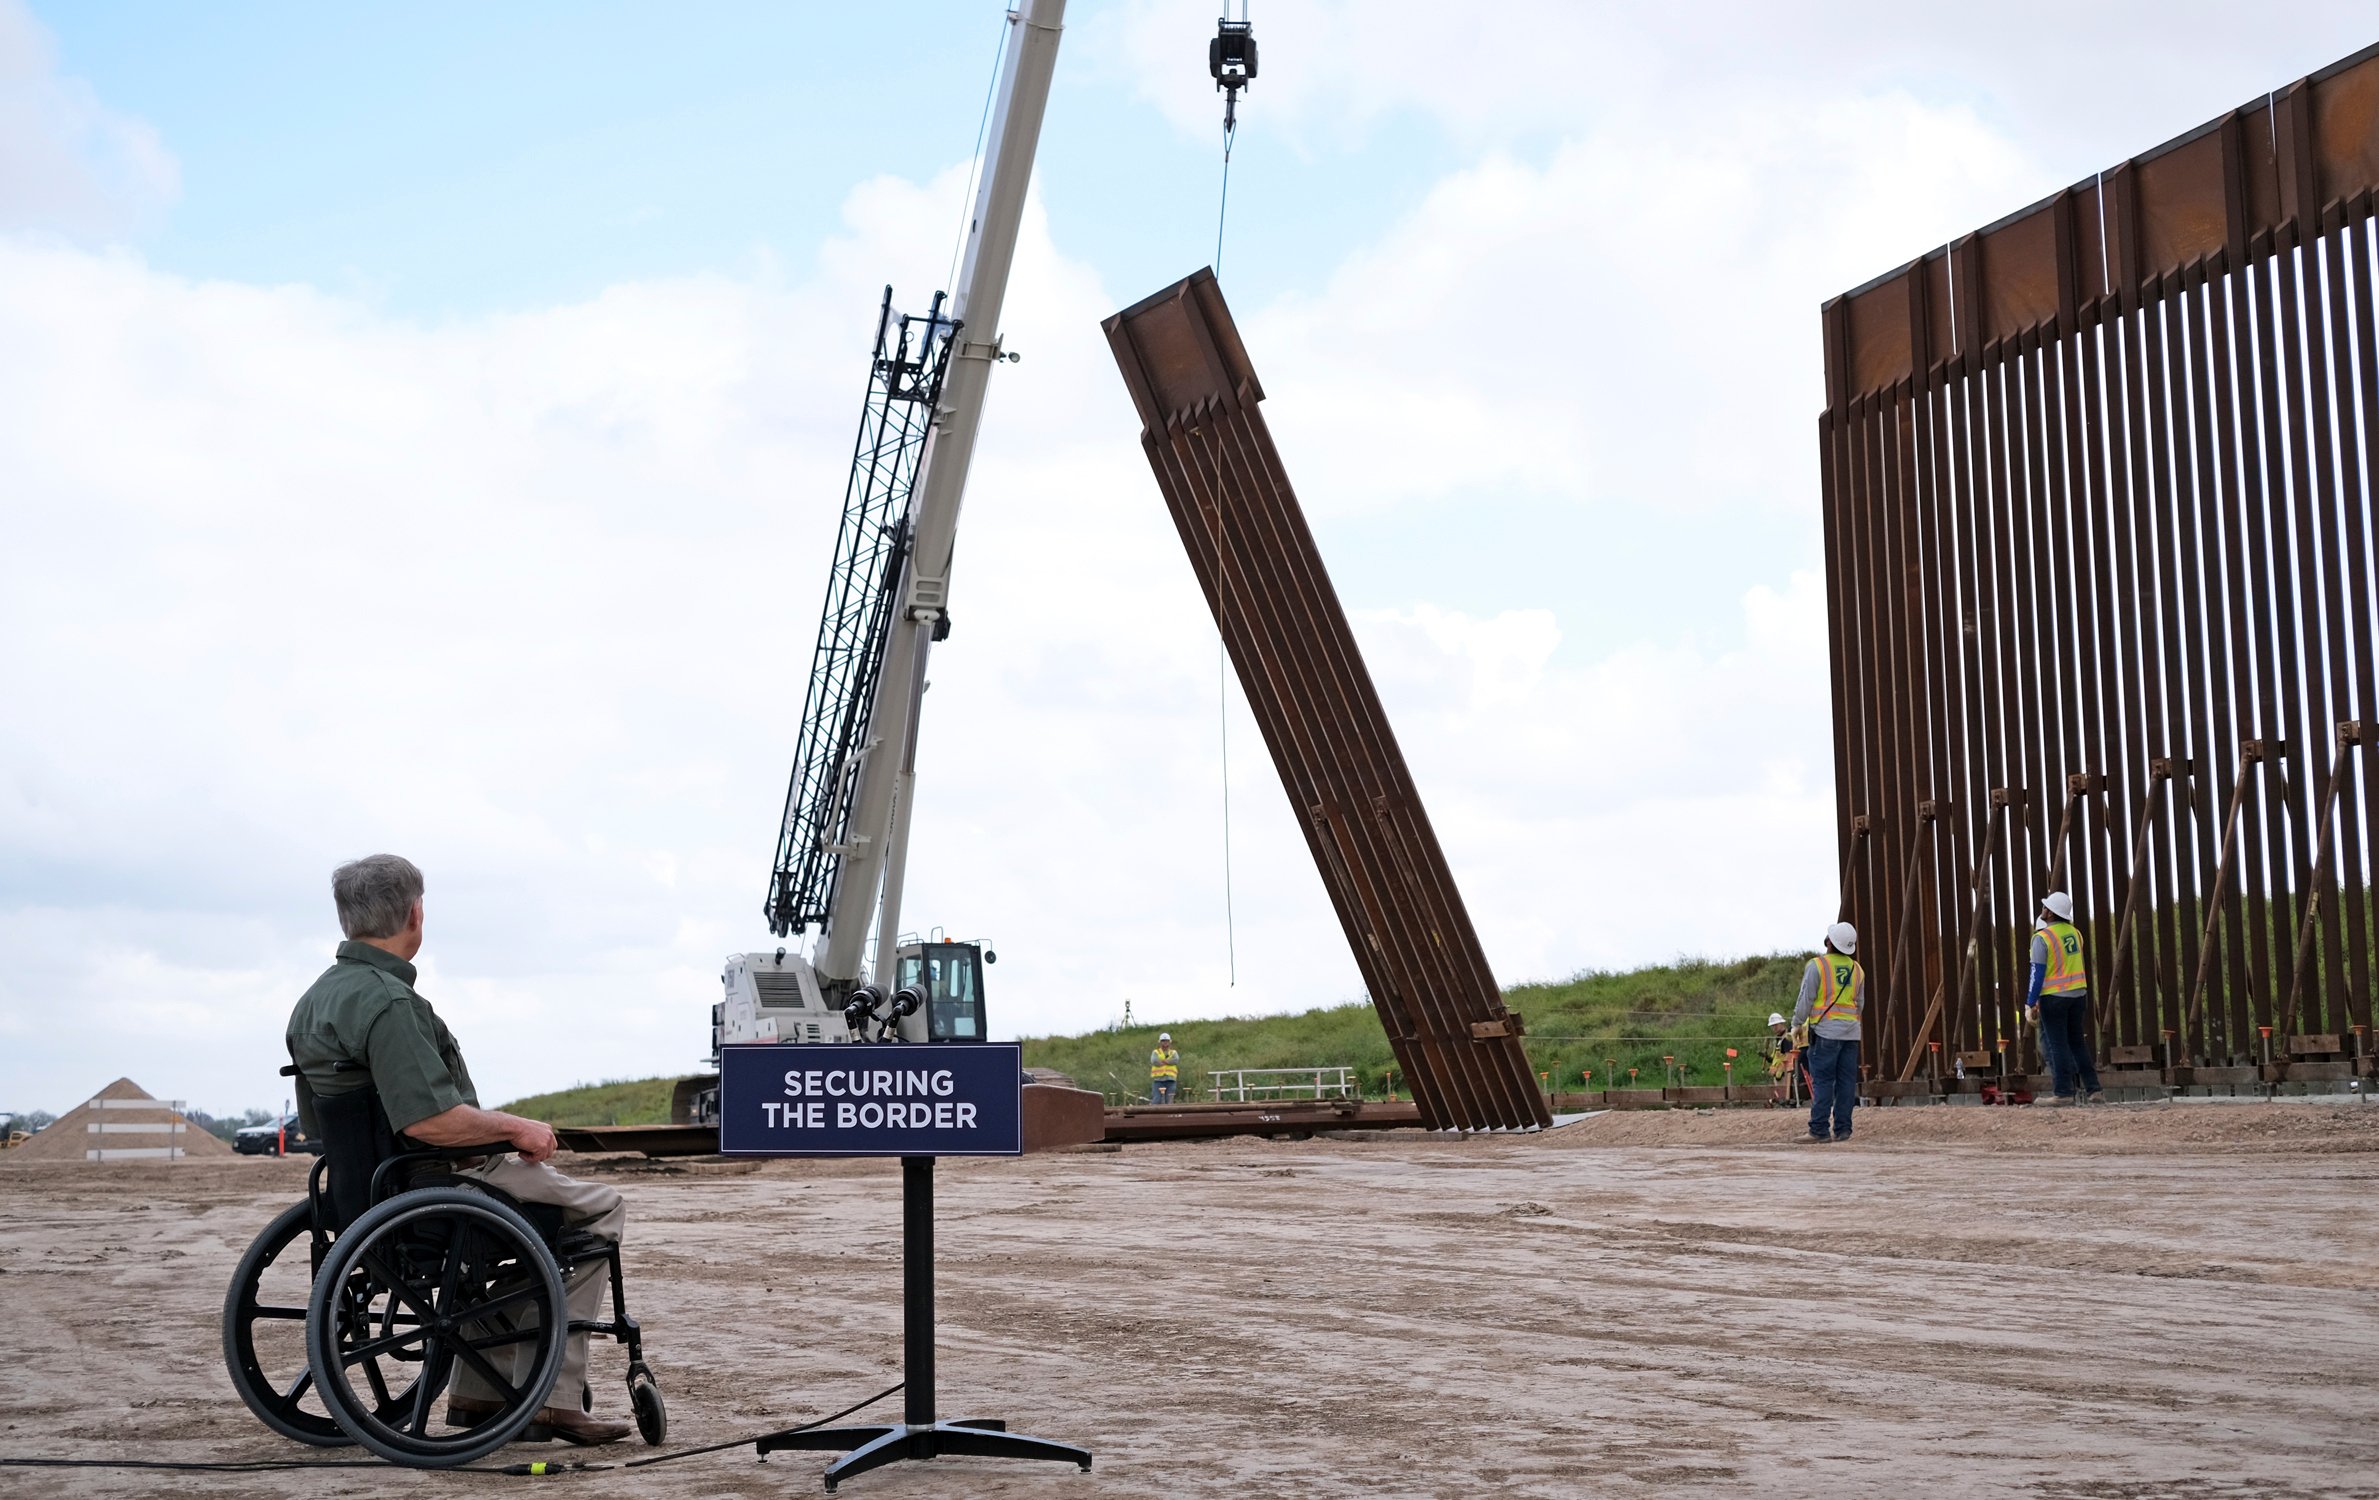 Greg Abbott, sitting in his wheelchair at a podium labeled "Securing the Border," watches as a crane puts up a segment of the border wall, part of the seemingly endless spending on border security.